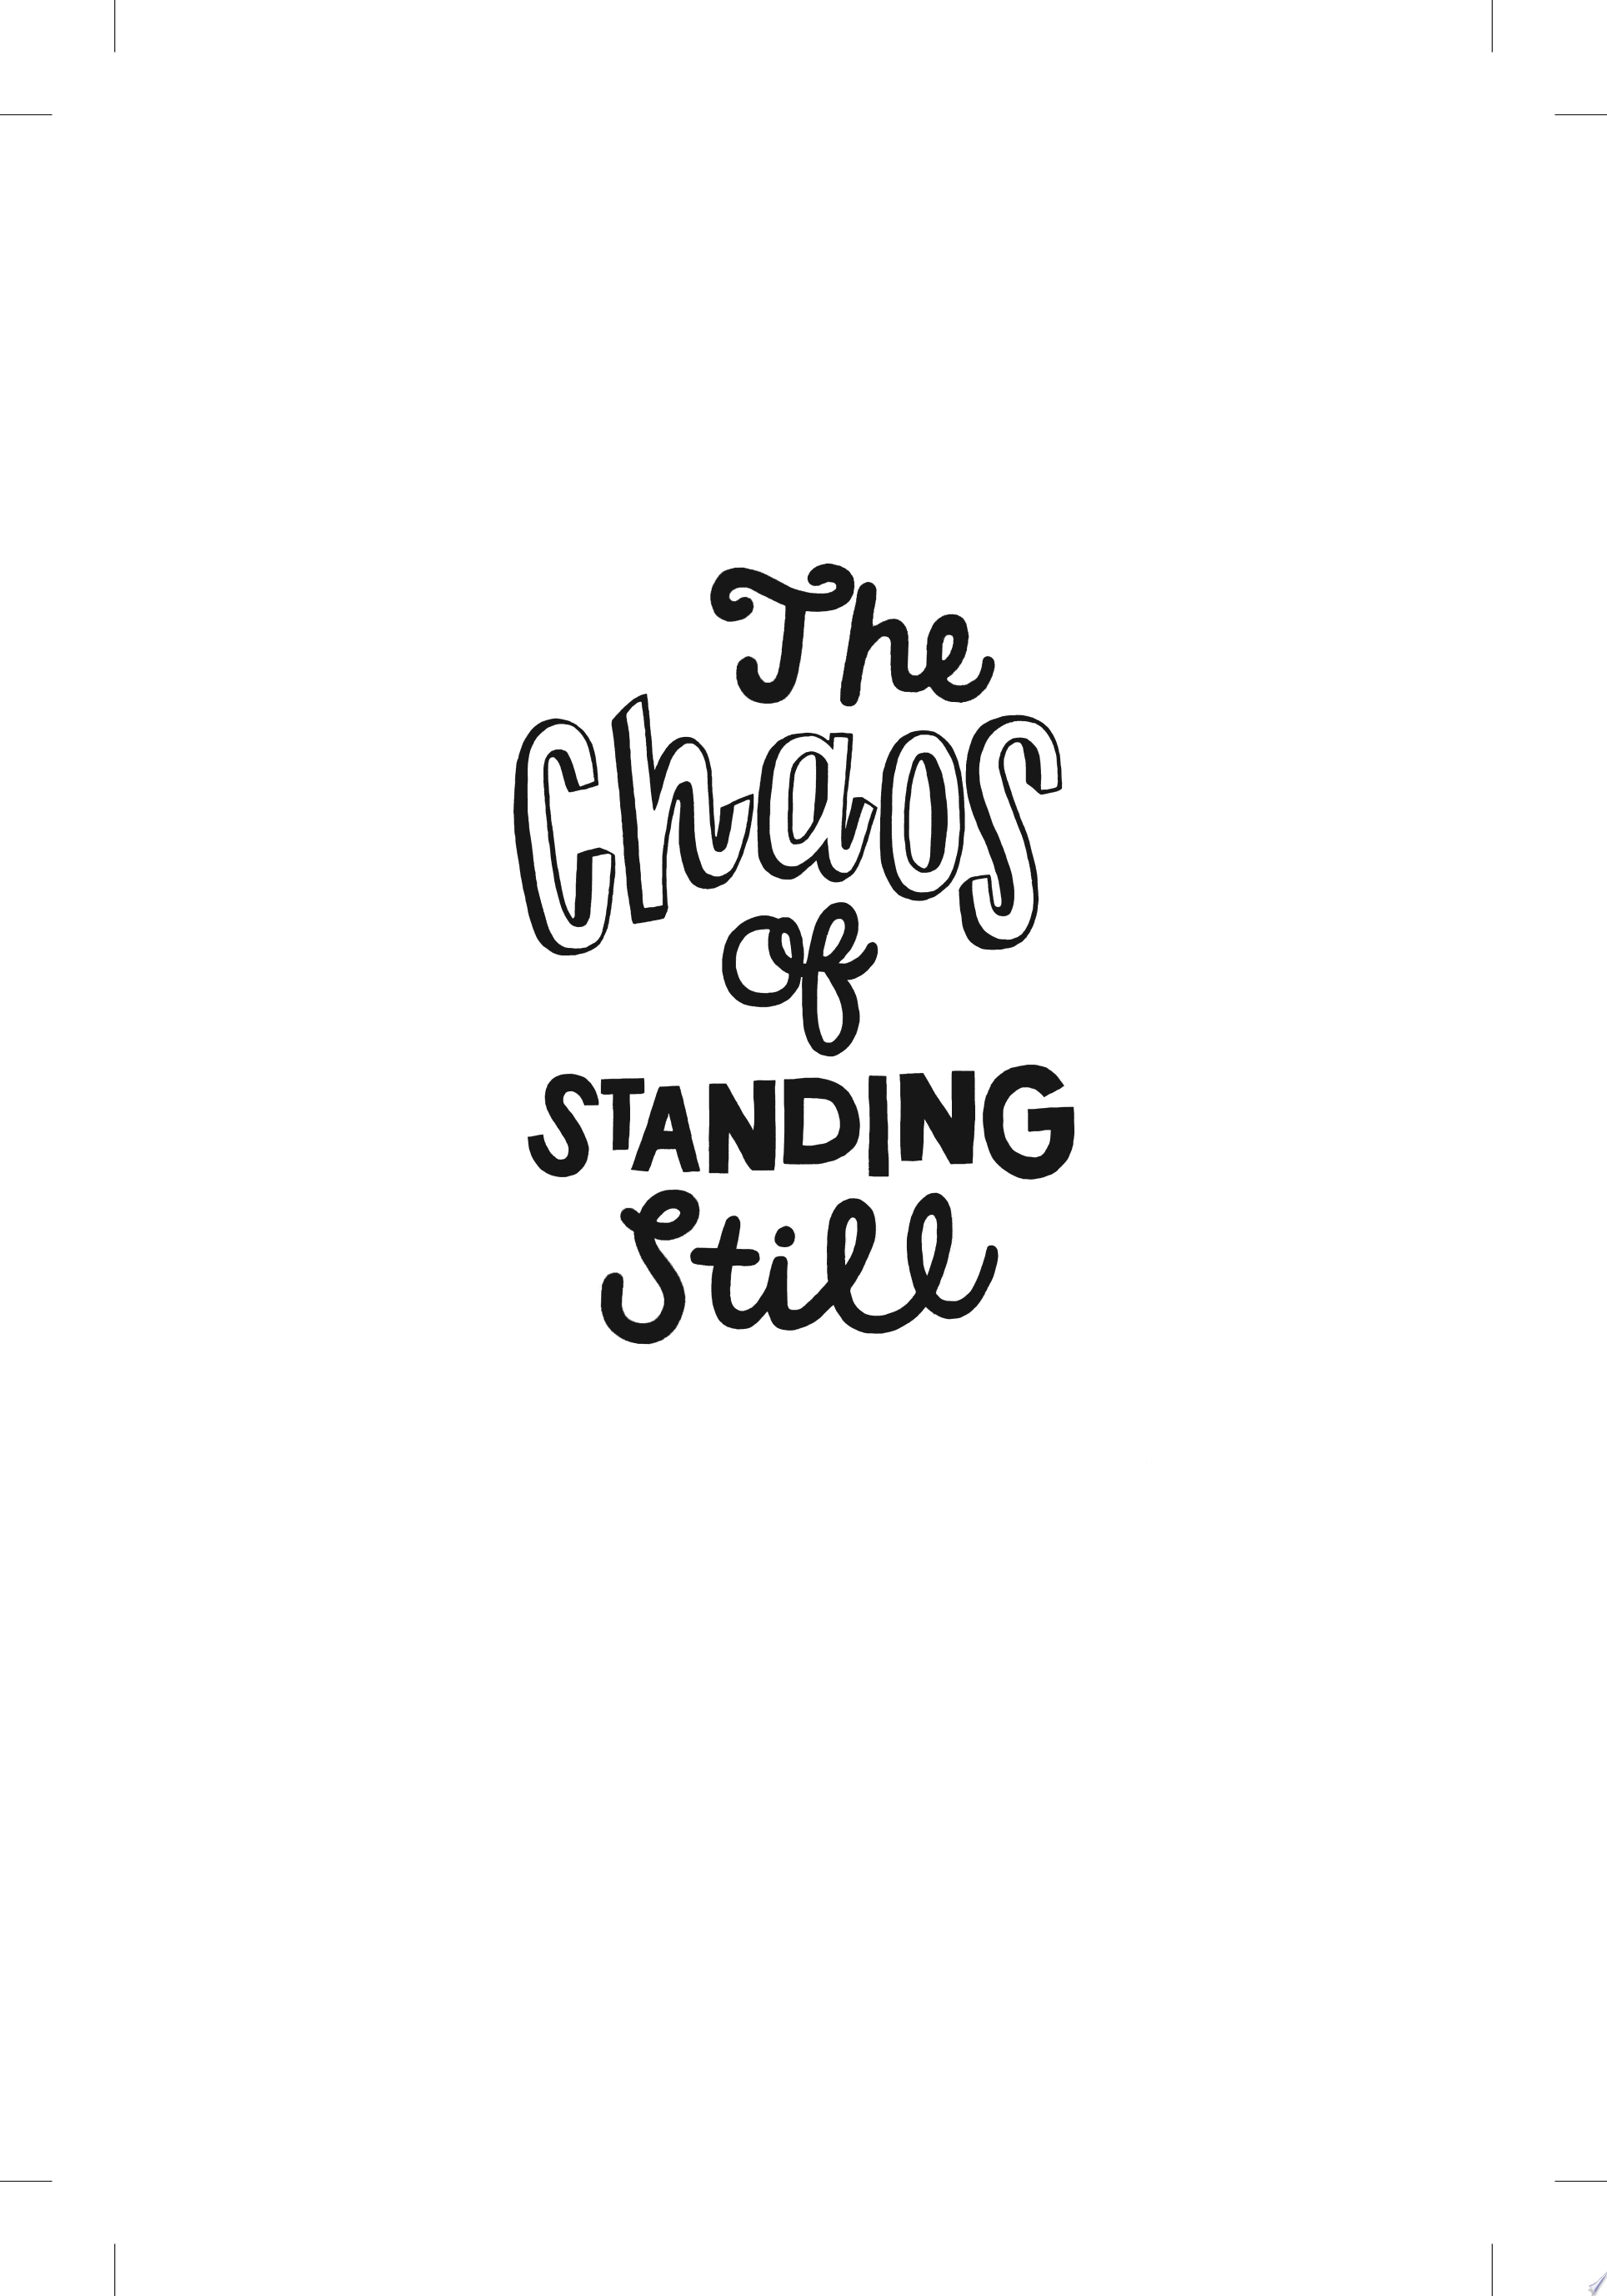 Image for "The Chaos of Standing Still"